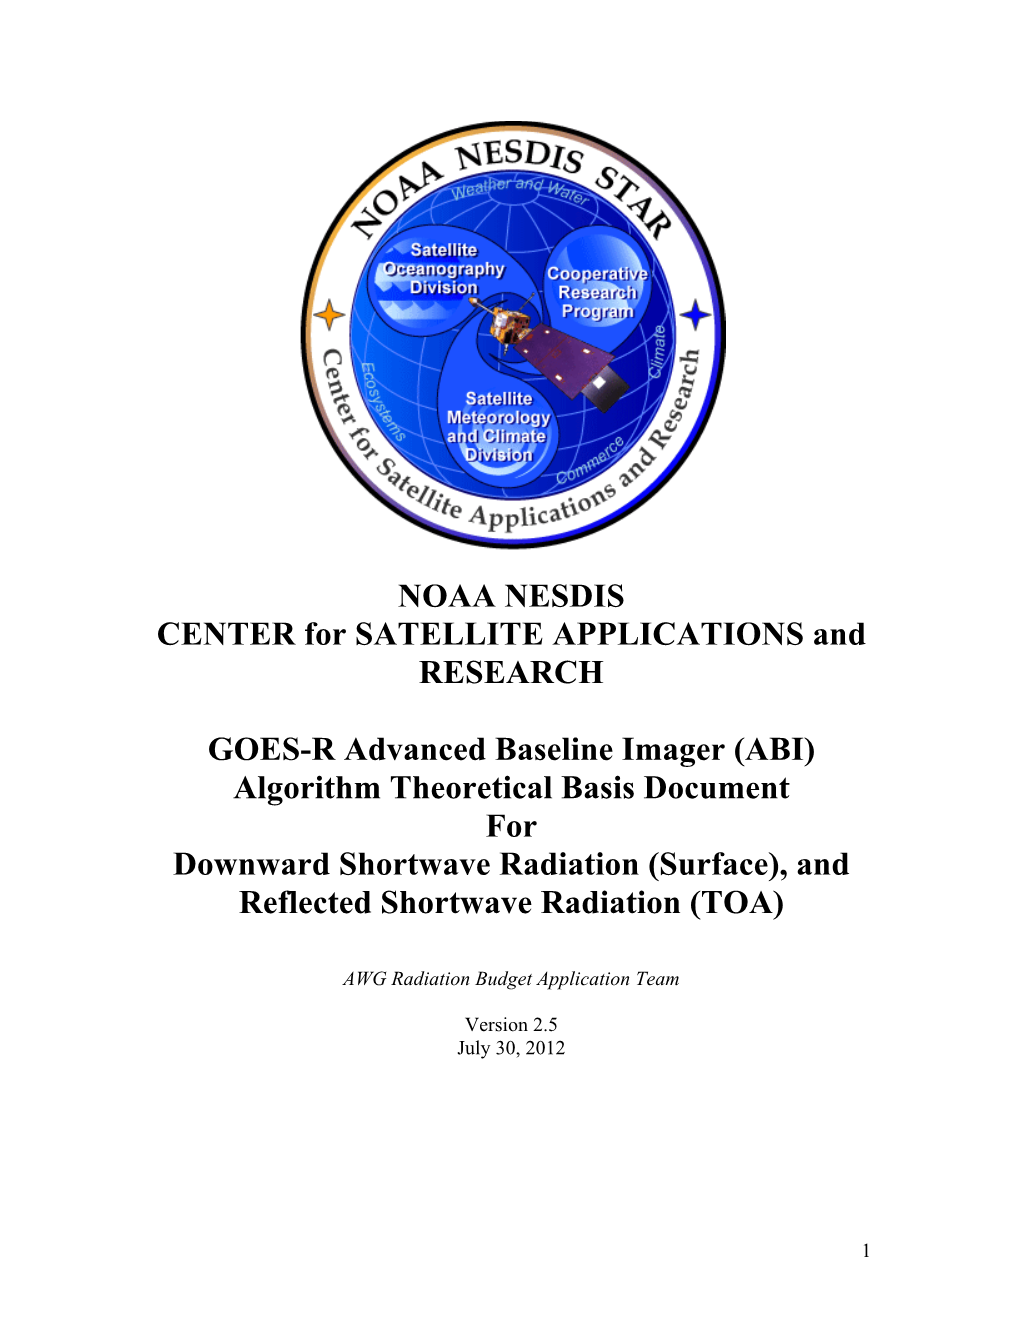 NOAA NESDIS CENTER for SATELLITE APPLICATIONS and RESEARCH